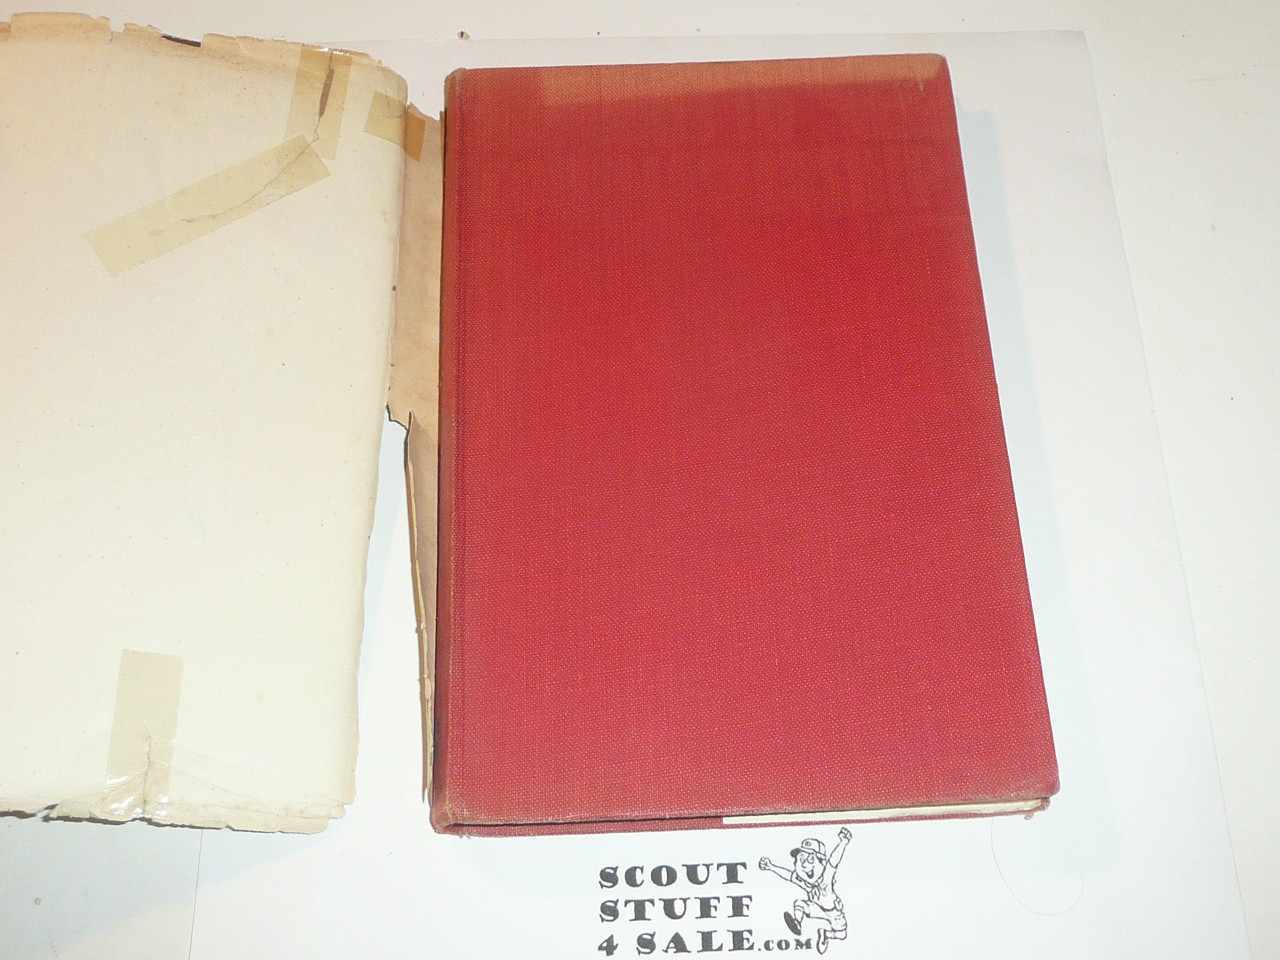 1949 Aids to Scoutmastership by Baden Powell, World Brotherhood Edition, hardbound with dust jacket